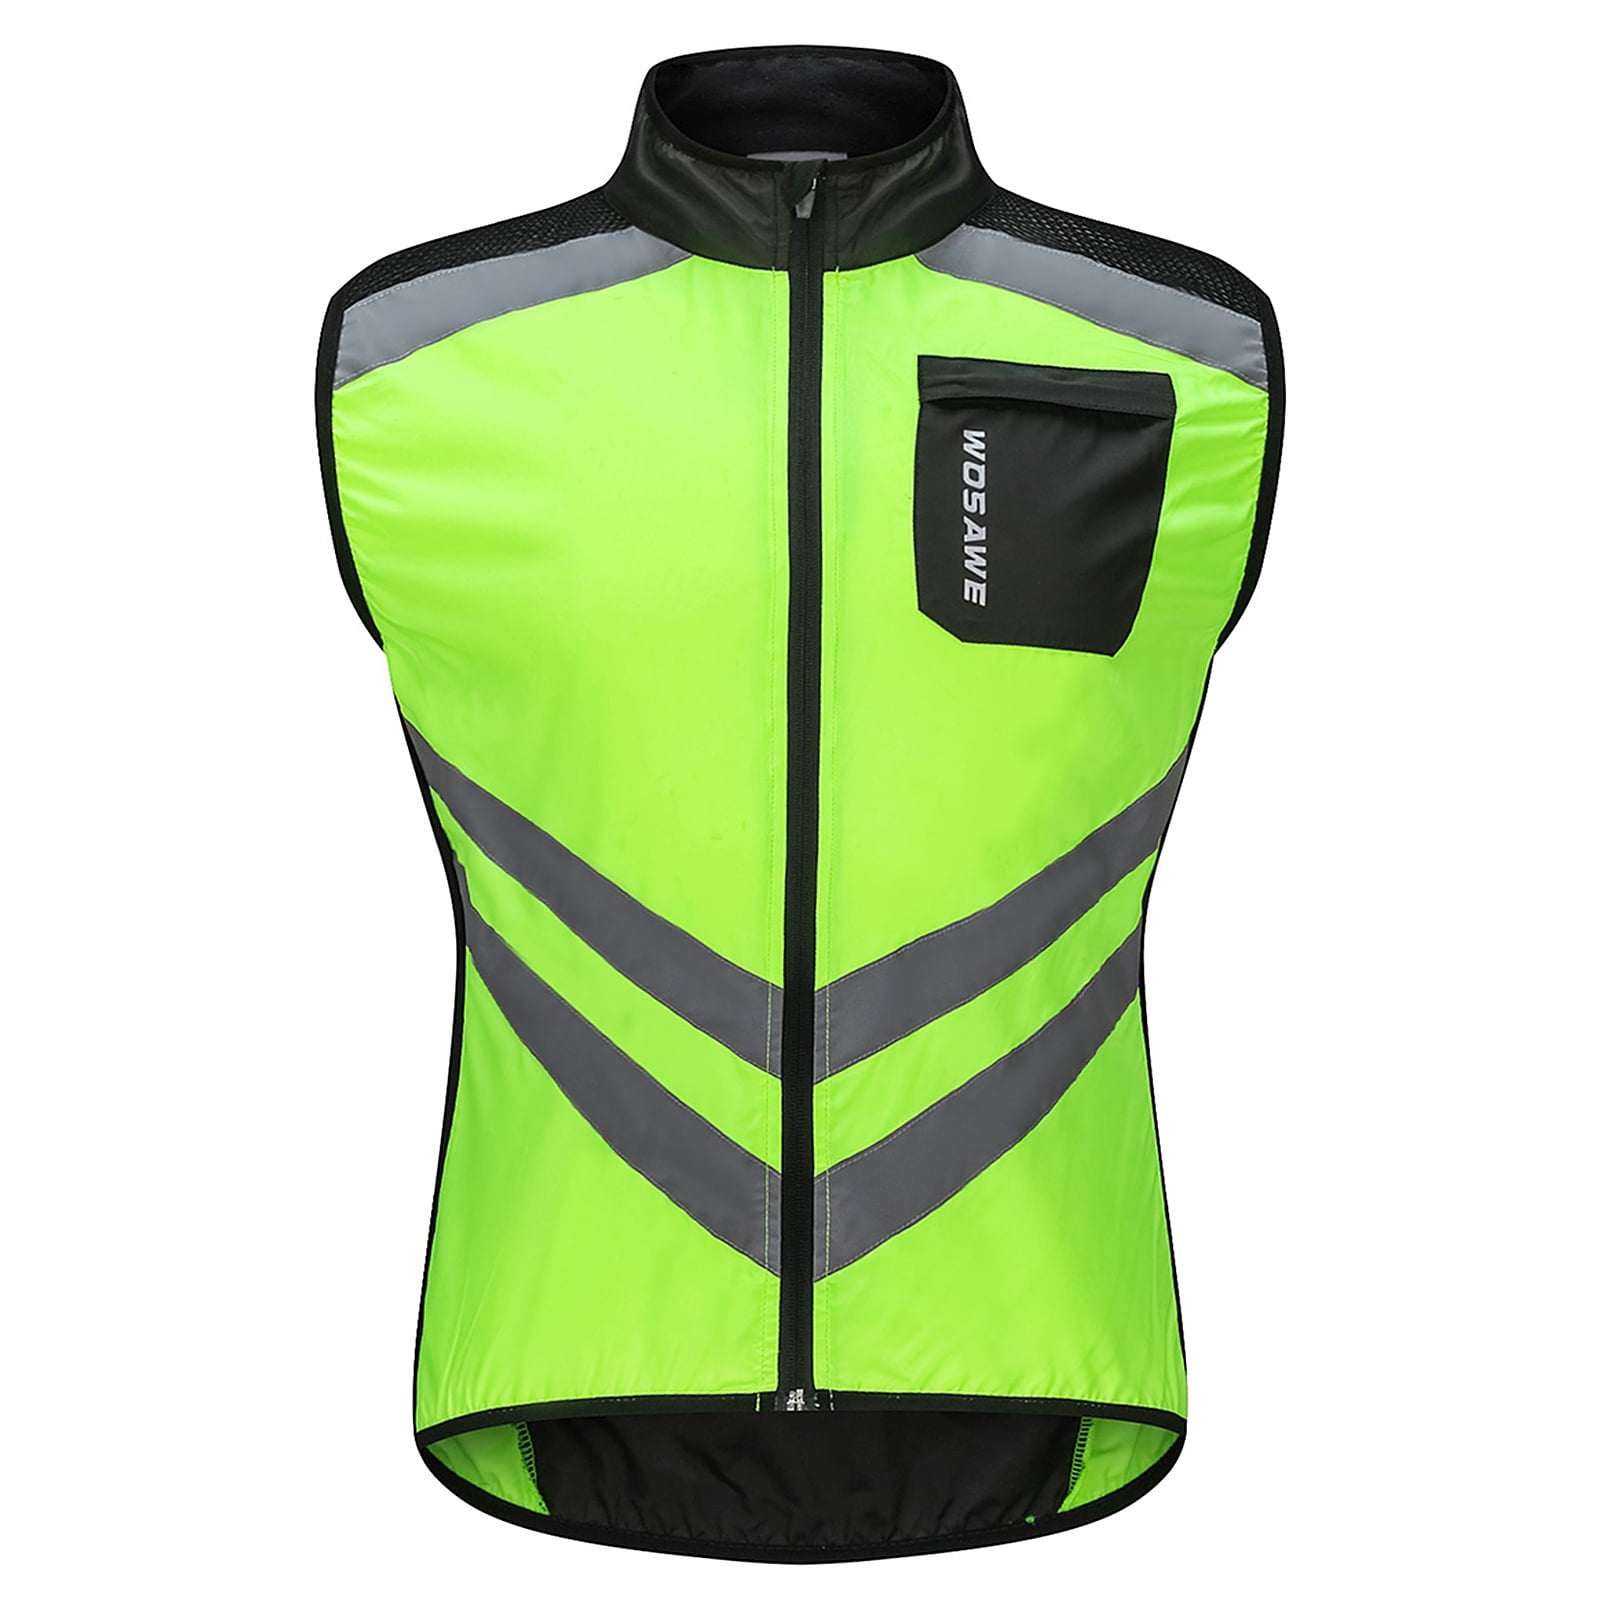 Breathable Men Cycling Vest Mesh Back Tank Top Gillet Waistcoat for Running 